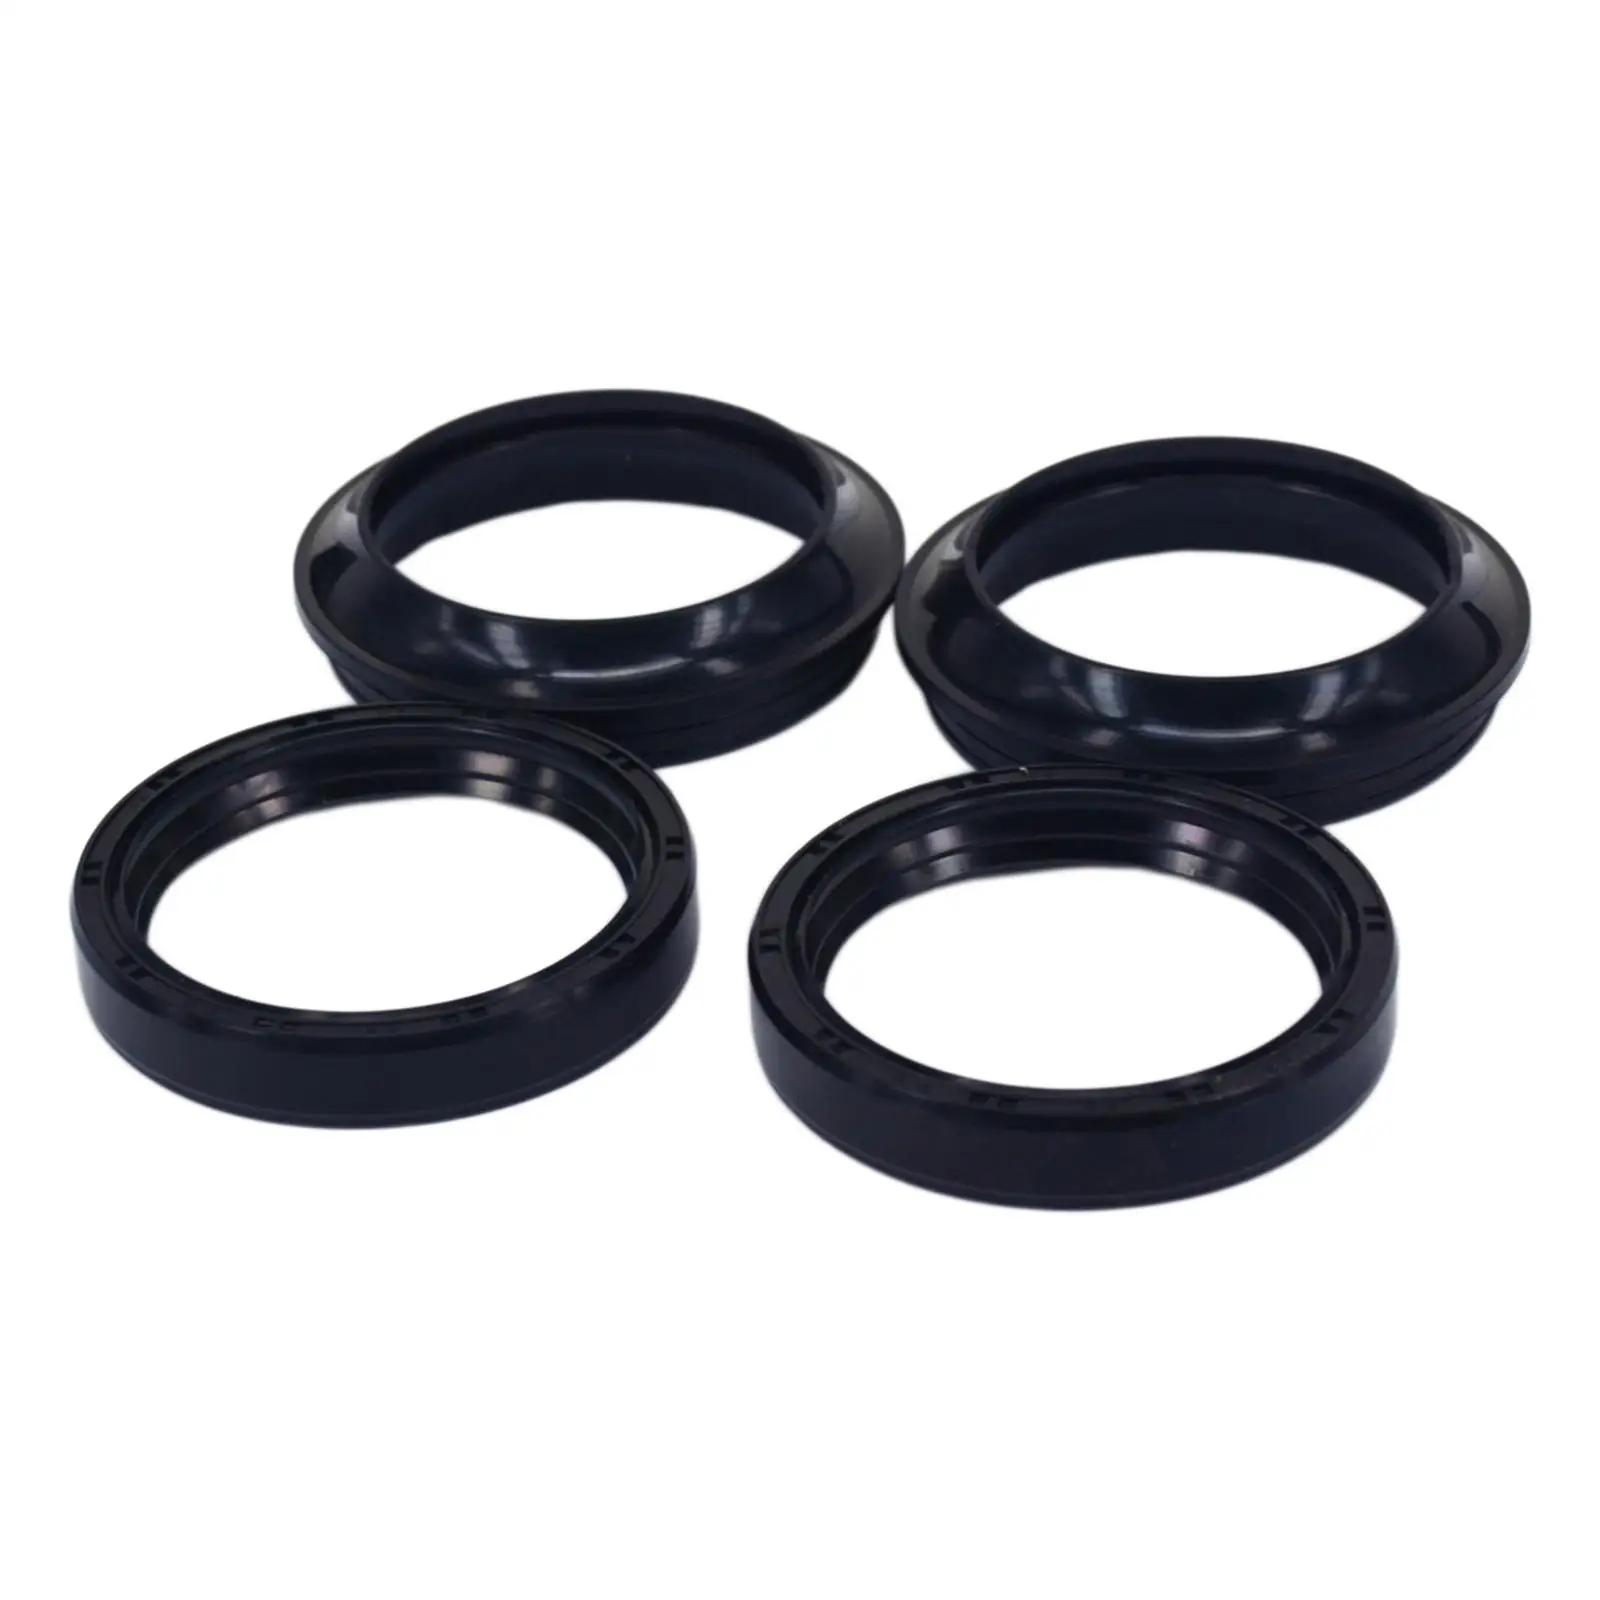 Motorcycle Front Shock Absorber Oil Seals Set 37x50x11mm  CBR250RA  XR500R